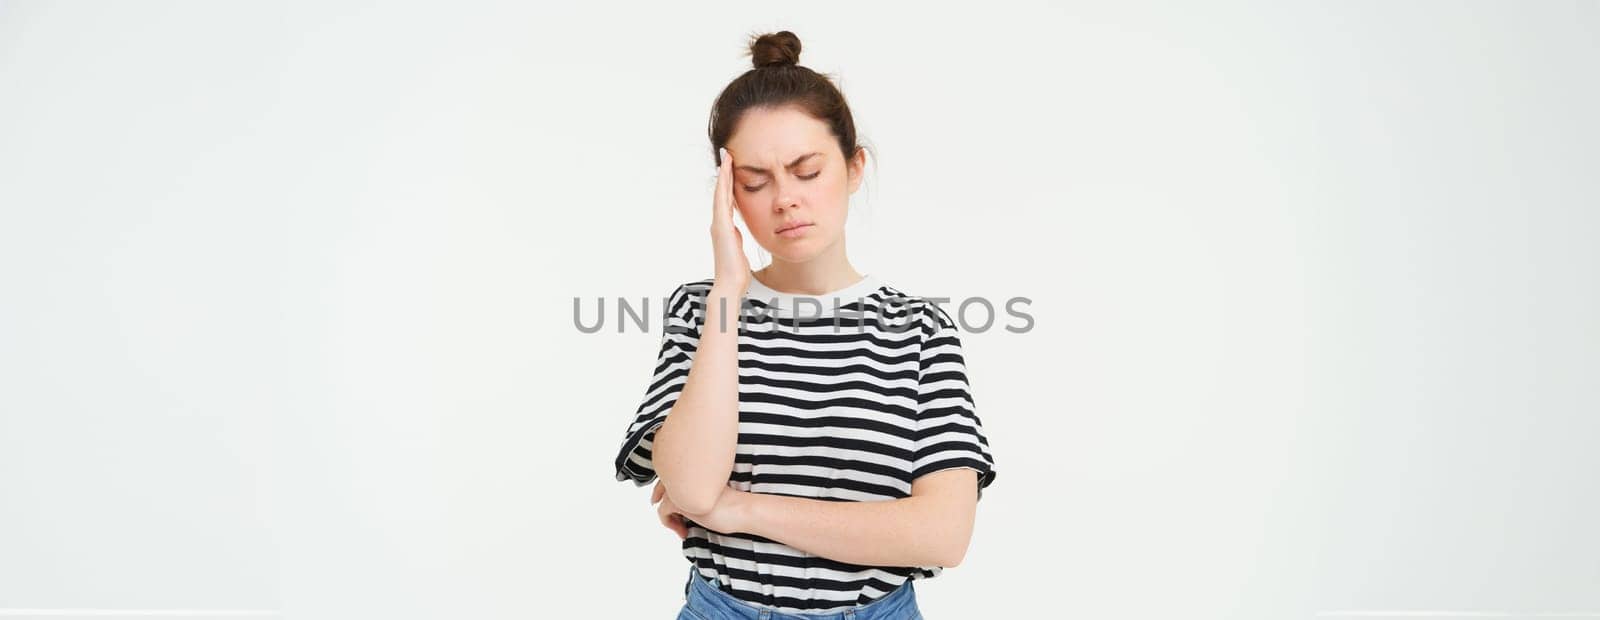 Portrait of tired woman rubs her forehead, touches head, has a headache, stands distressed against white background.